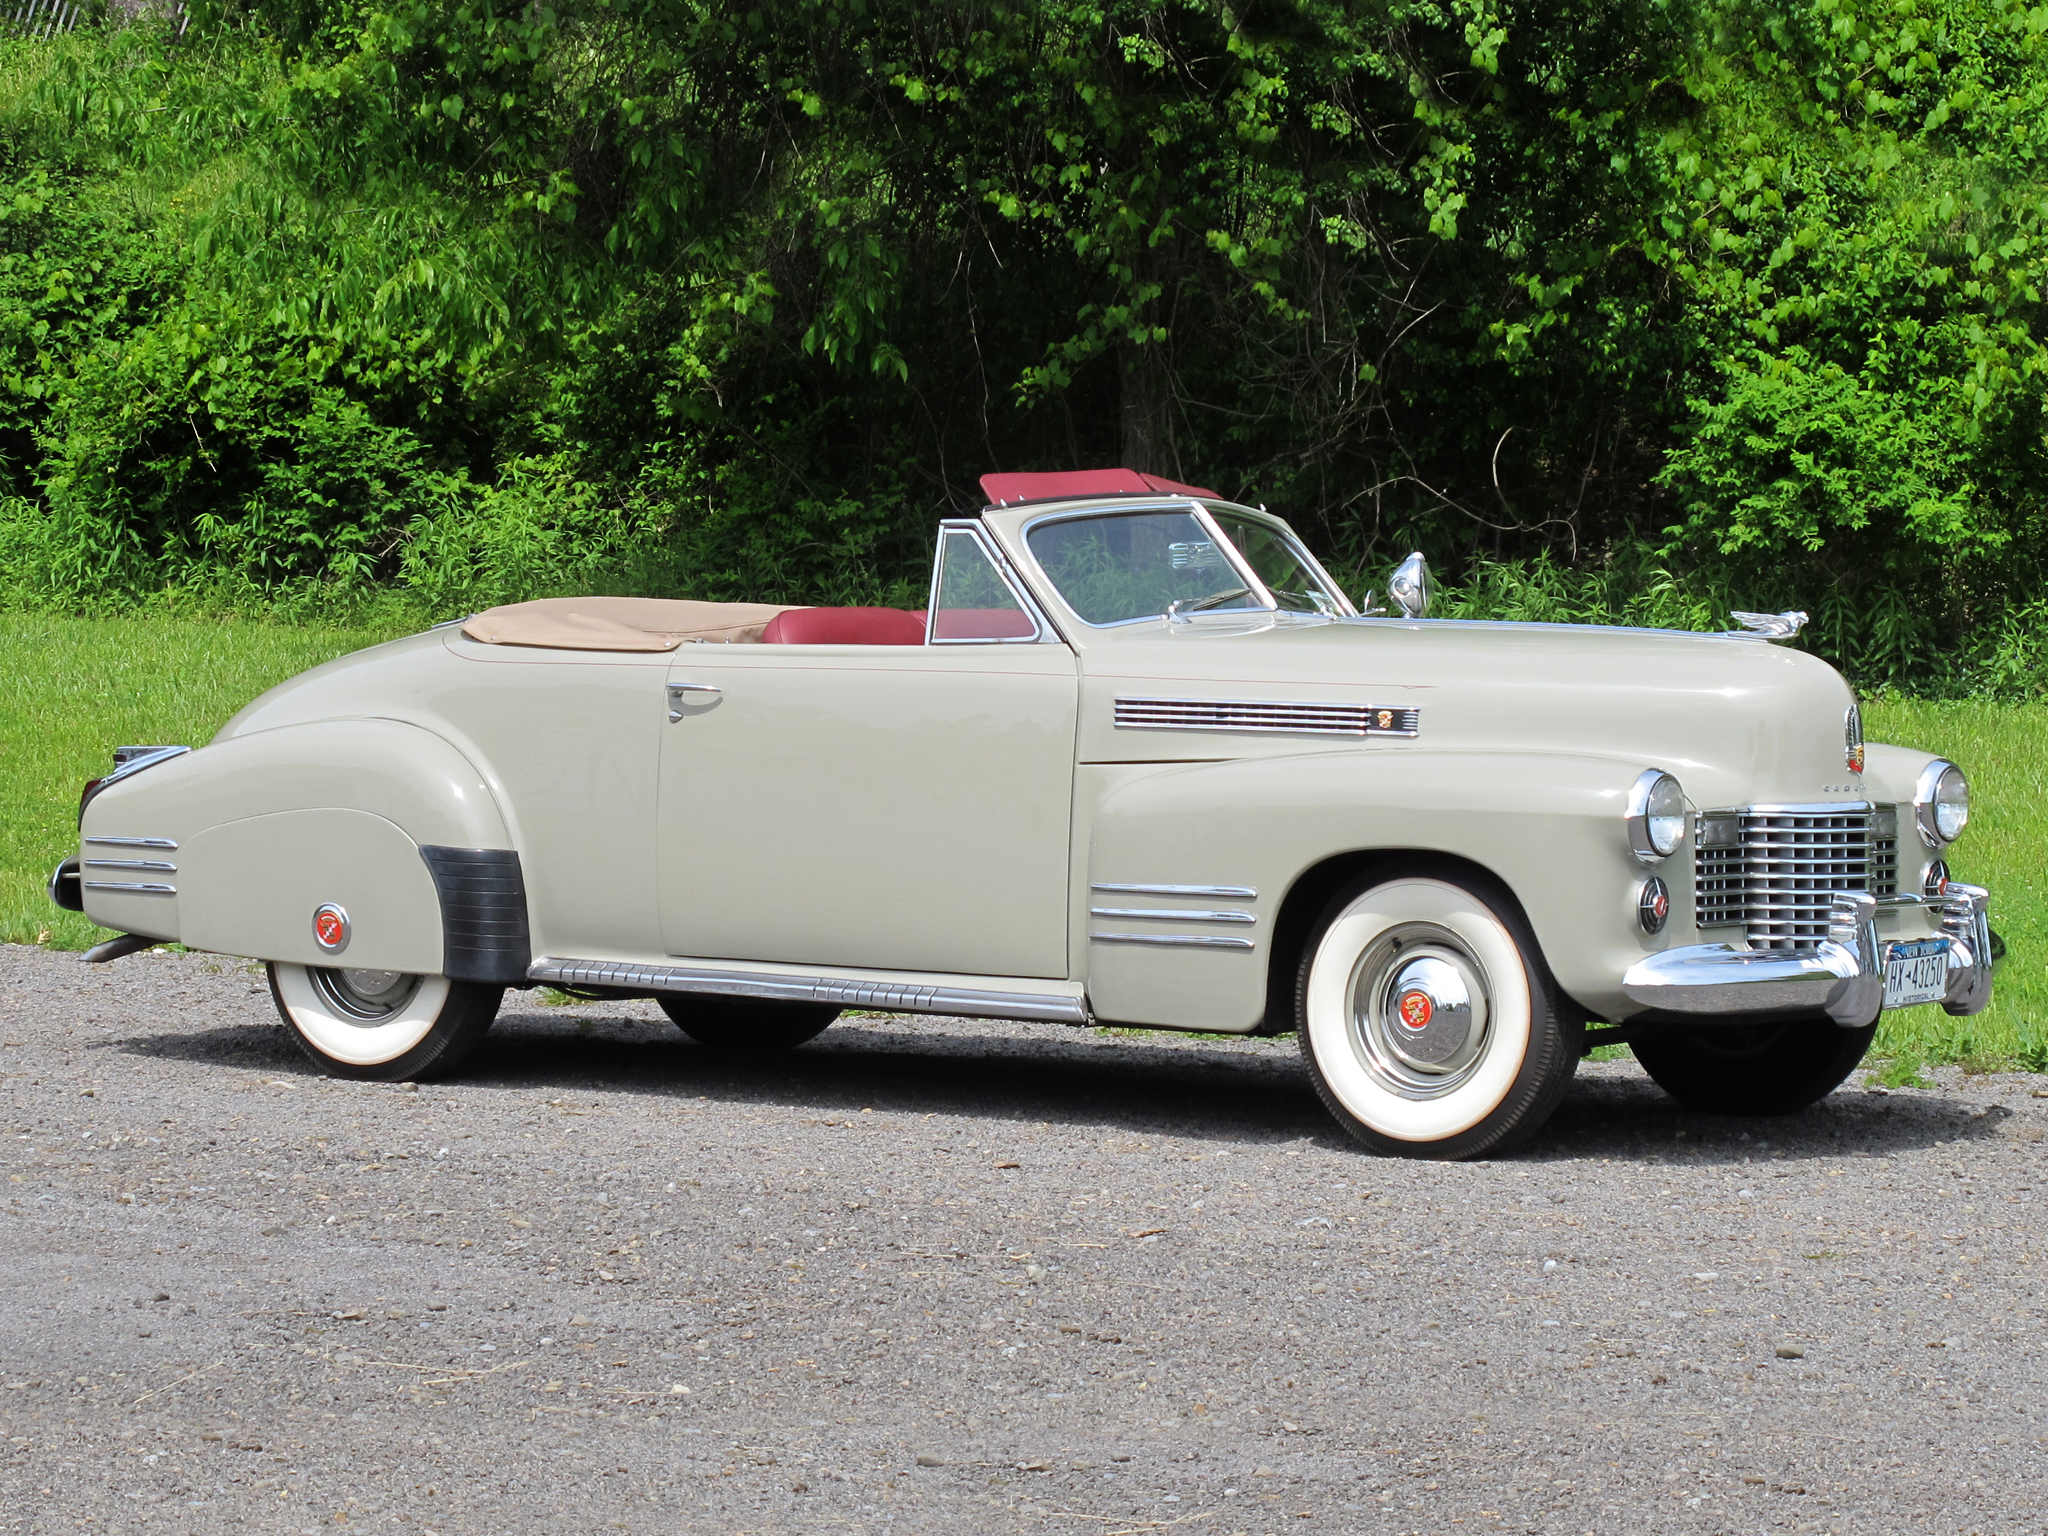 1941, Cadillac, Sixty two, Convertible, Coupe, Luxury, Retro, Hs Wallpaper